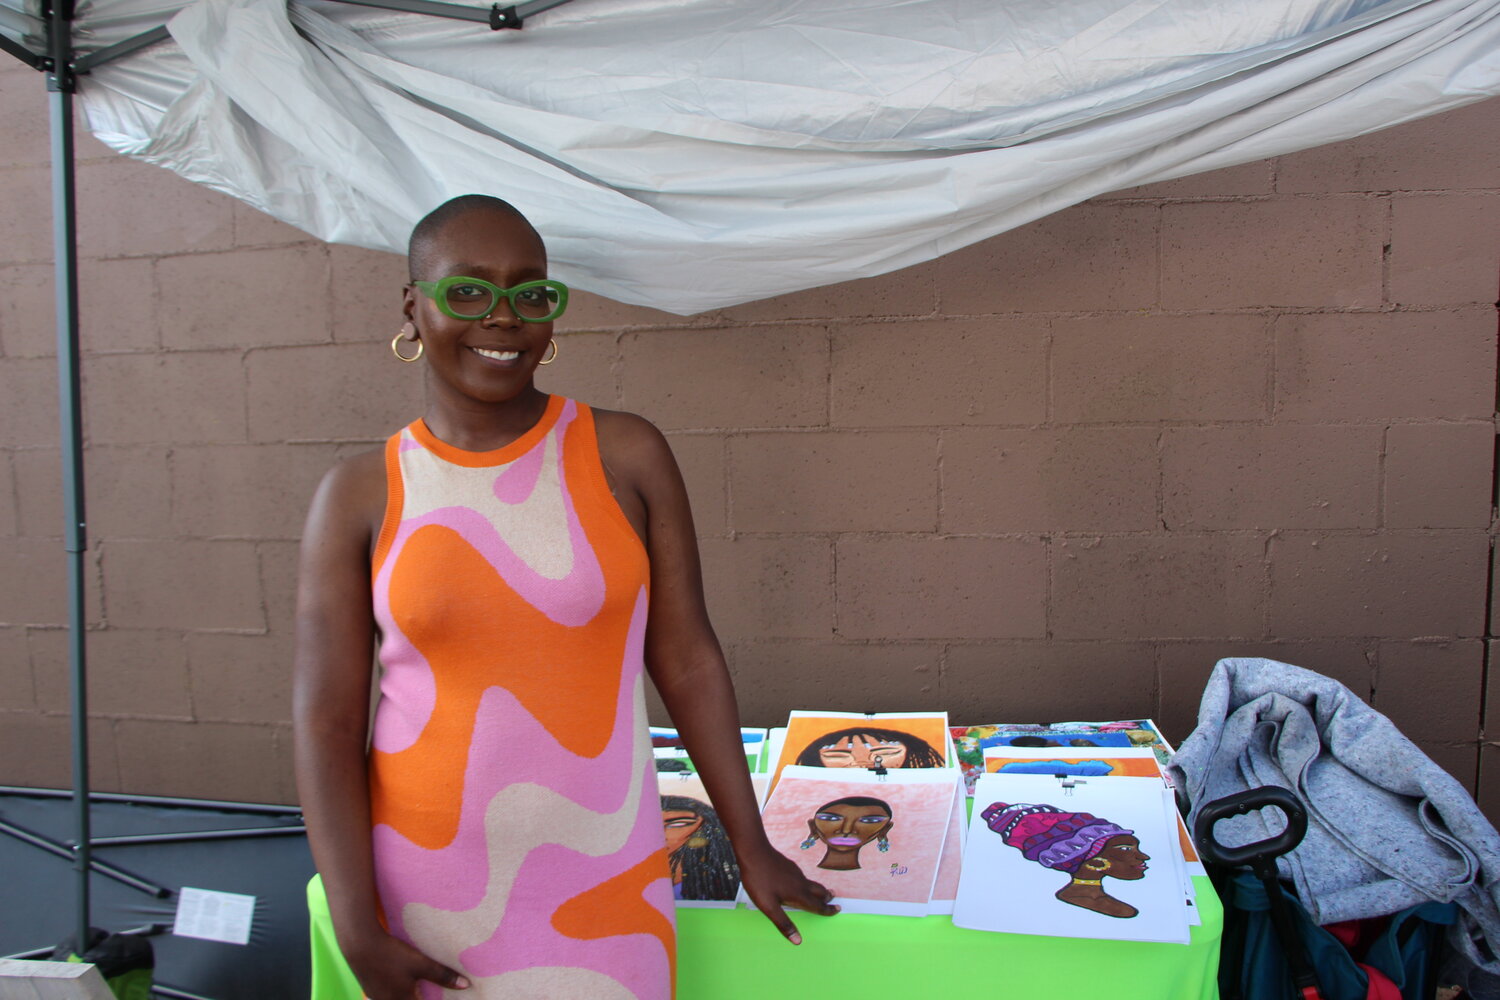 Artist Rajine stands in the vendors area of Juneteenth festival, Soul of the Southside selling her work. Rajine started her business, RajineTheQueenArtistry, during the pandemic making multimedia art about black femininity.